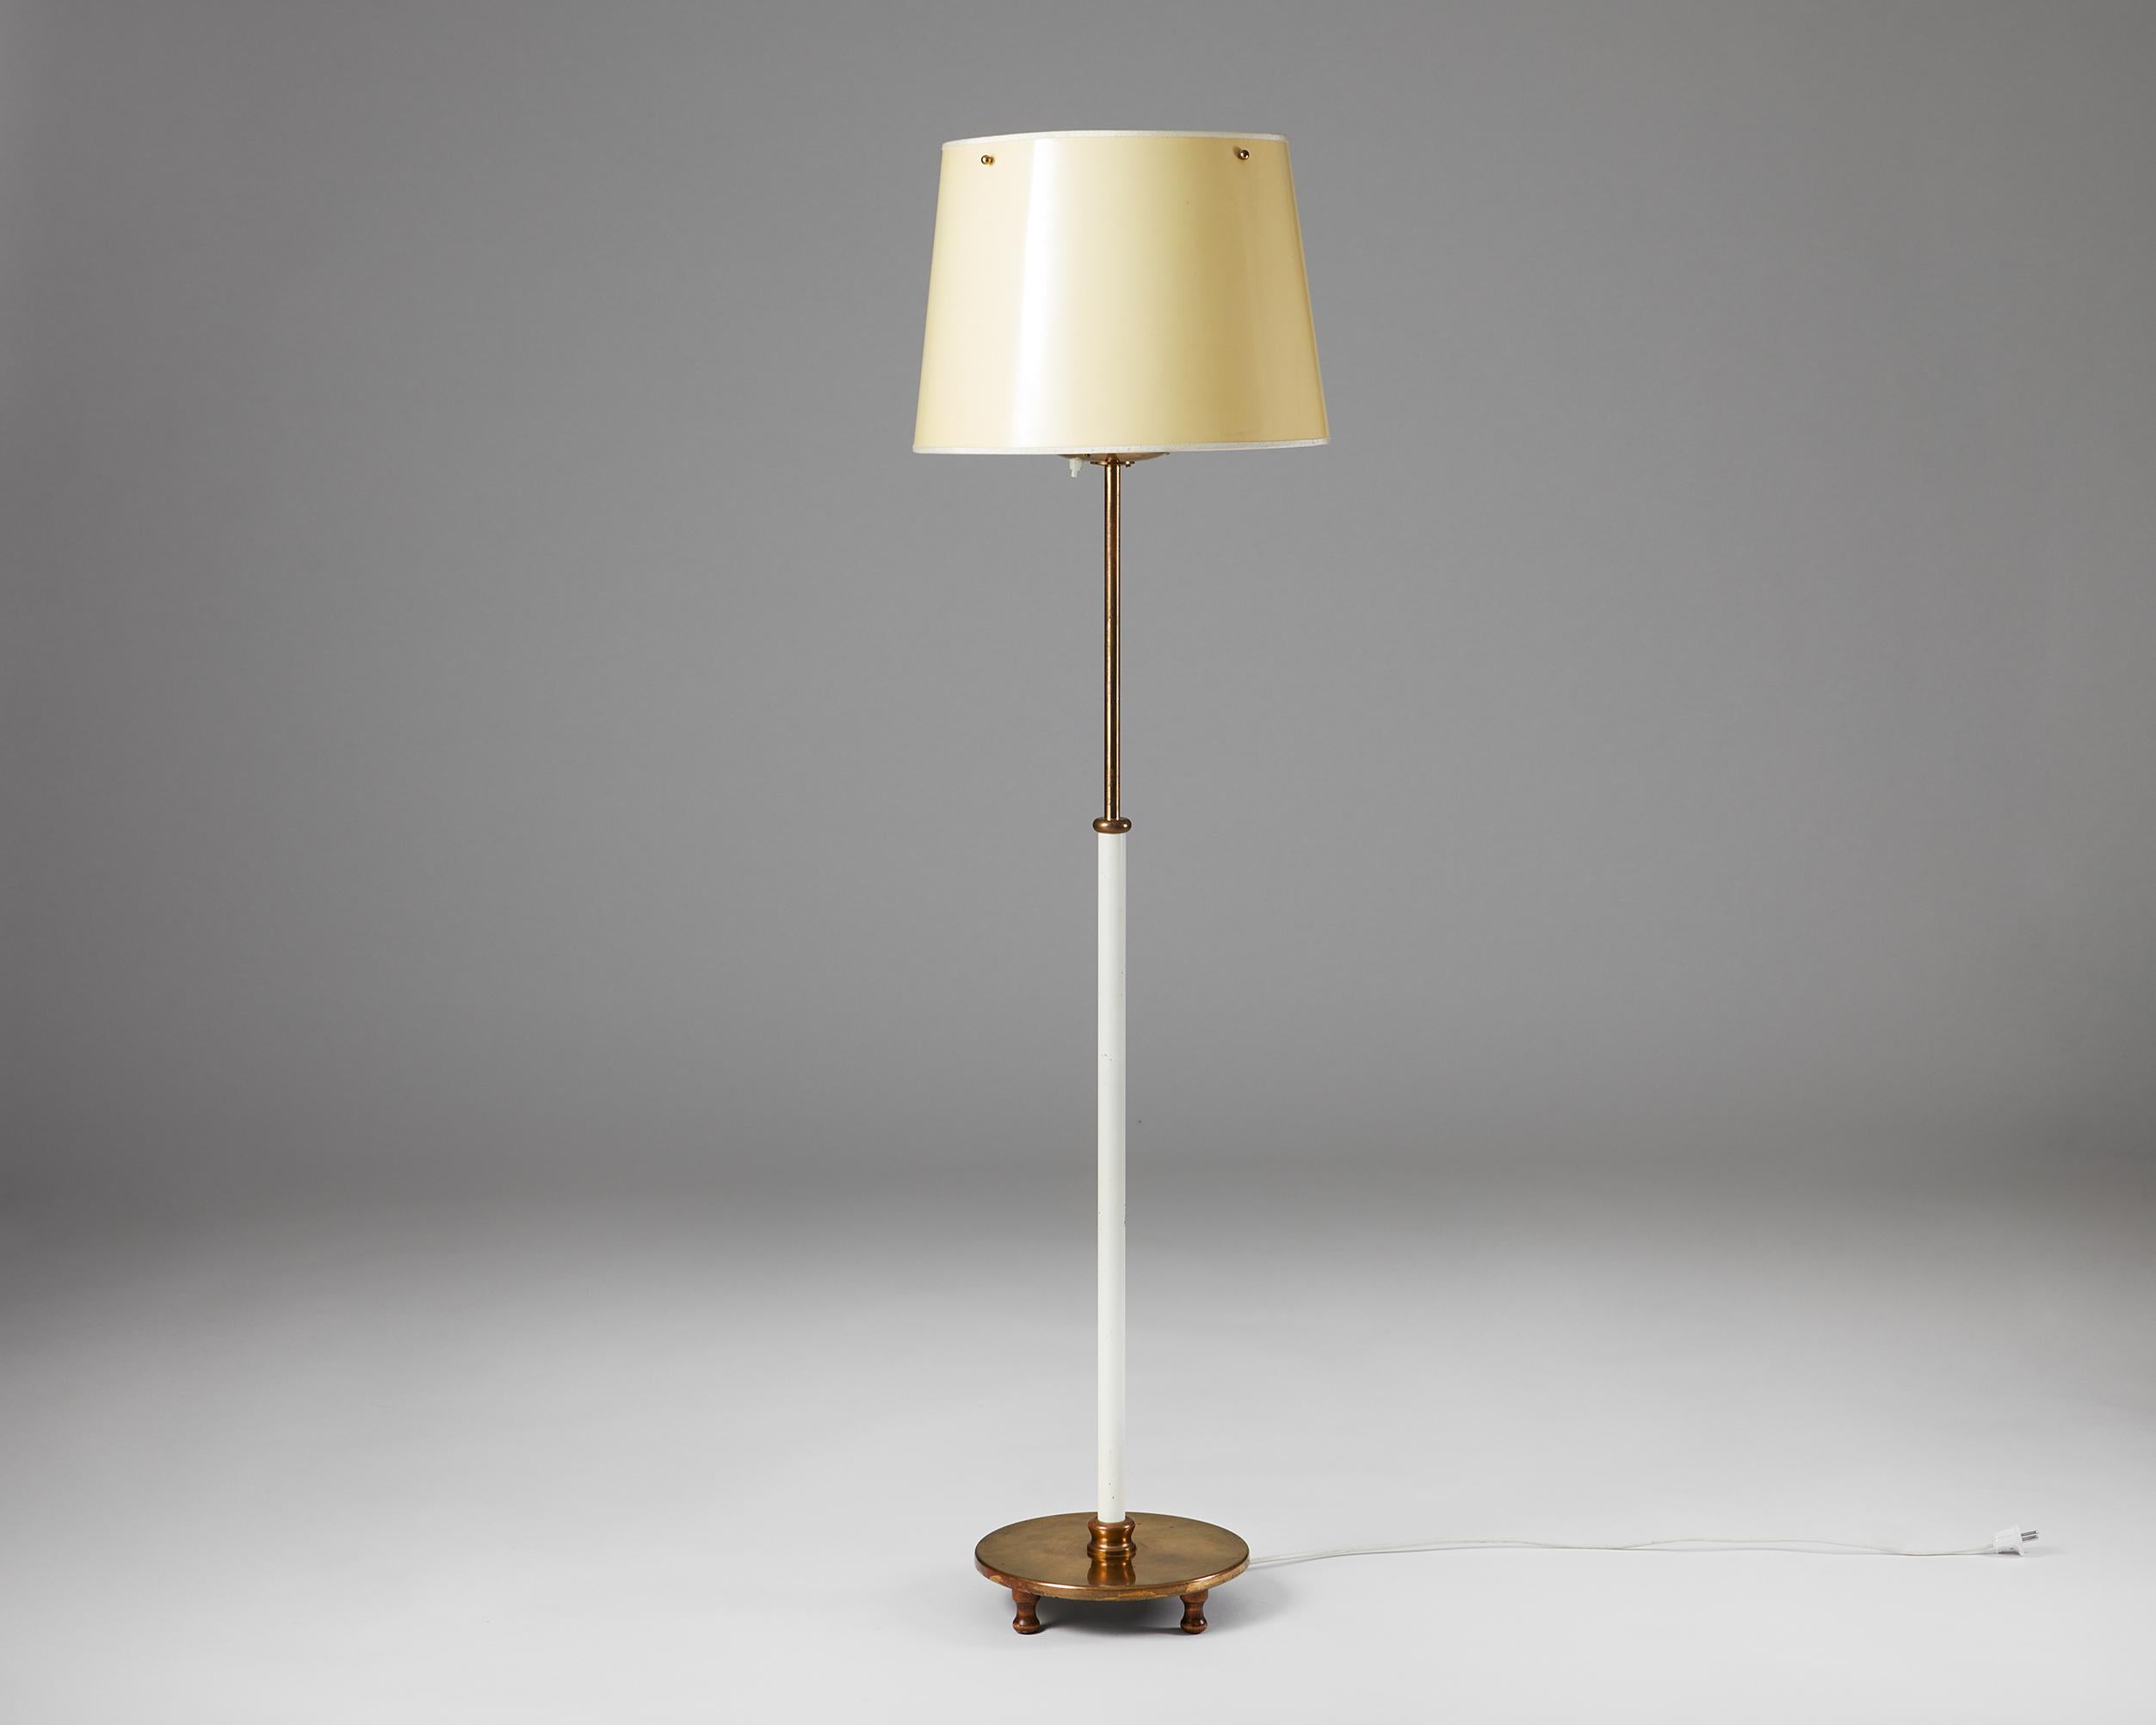 Floor lamp model 2564 designed by Josef Frank for Svenskt Tenn,
Sweden, 1950s.

White lacquered brass and Lacquered Paper.

Stamped.

This elegant brass floor lamp is adjustable in height and stands on turned mahogany feet. Other models by Josef